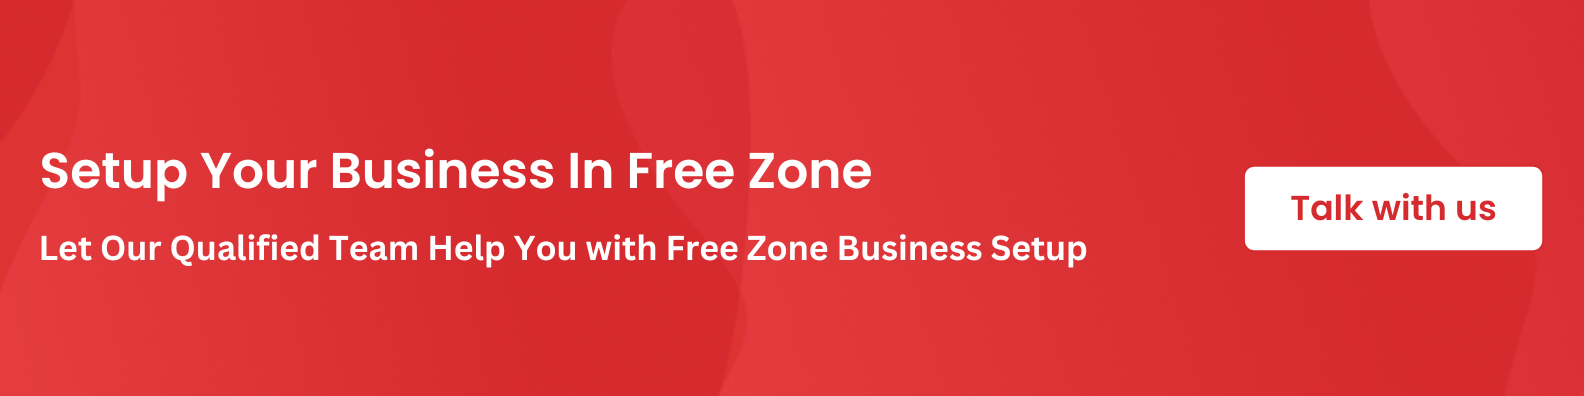 business-setup-in-free-zone